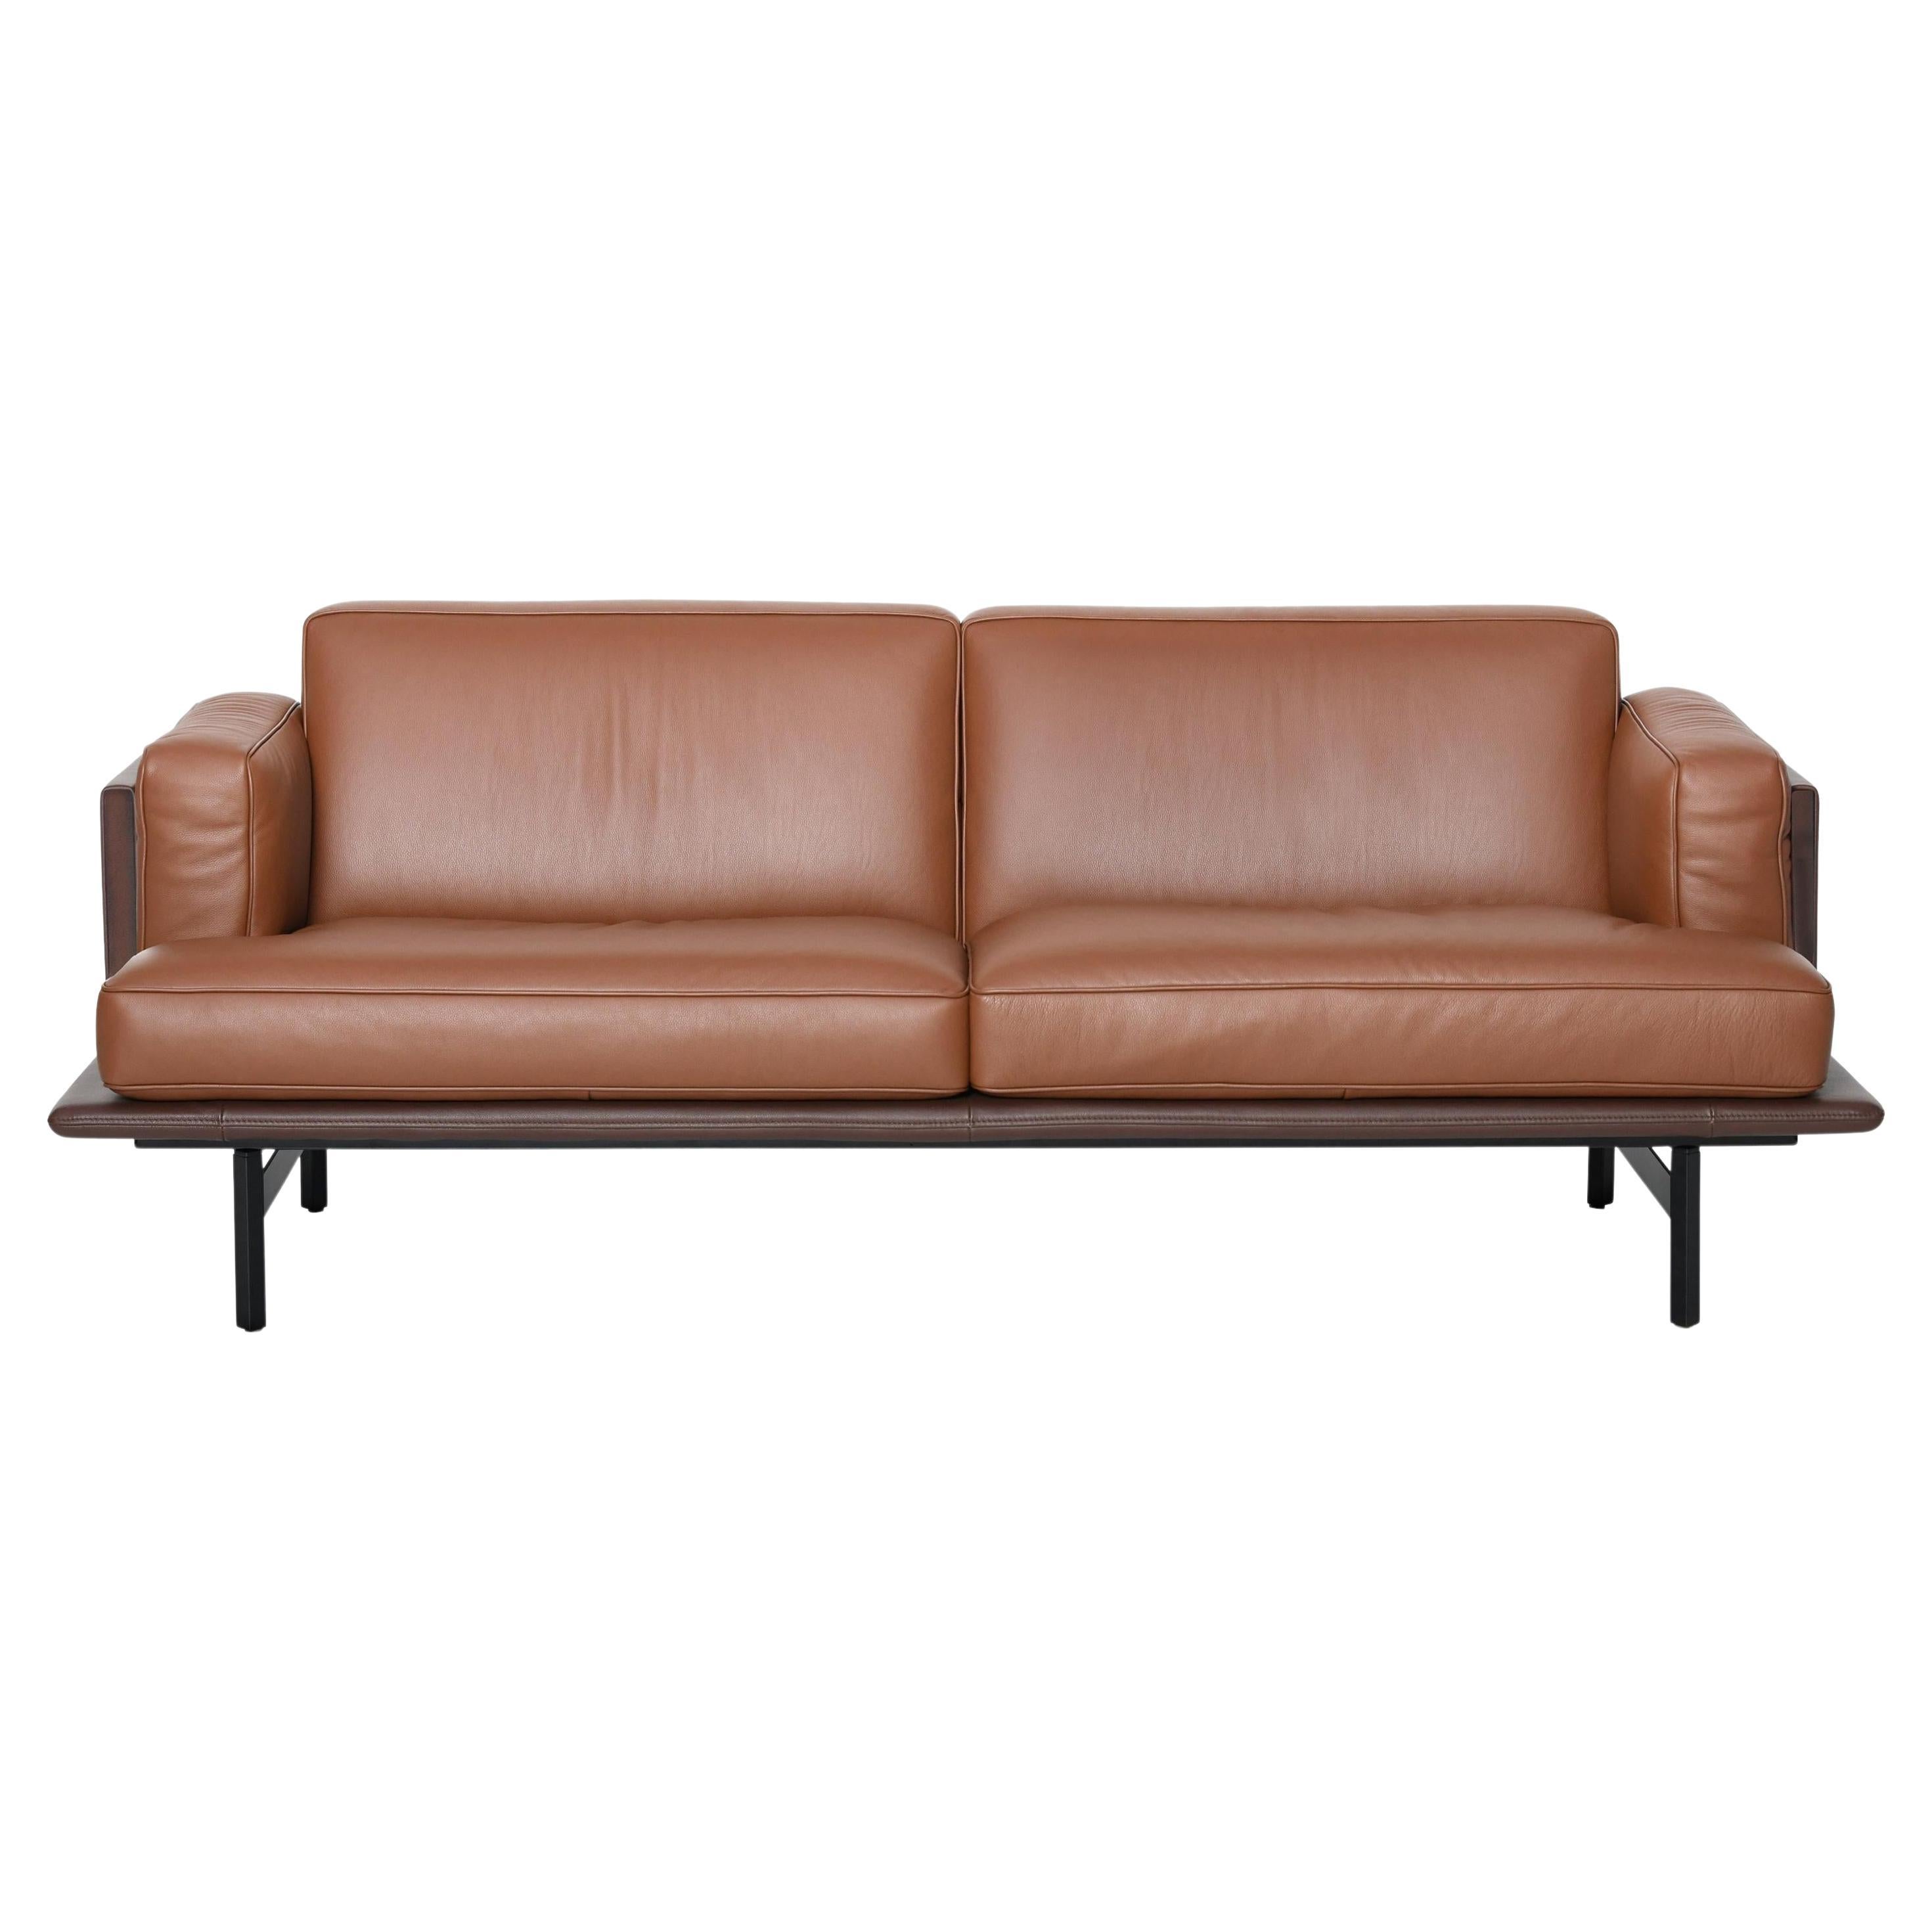 De Sede DS-175 Small Two-Seat Sofa in Hazel Upholstery by Patrick Norguet For Sale